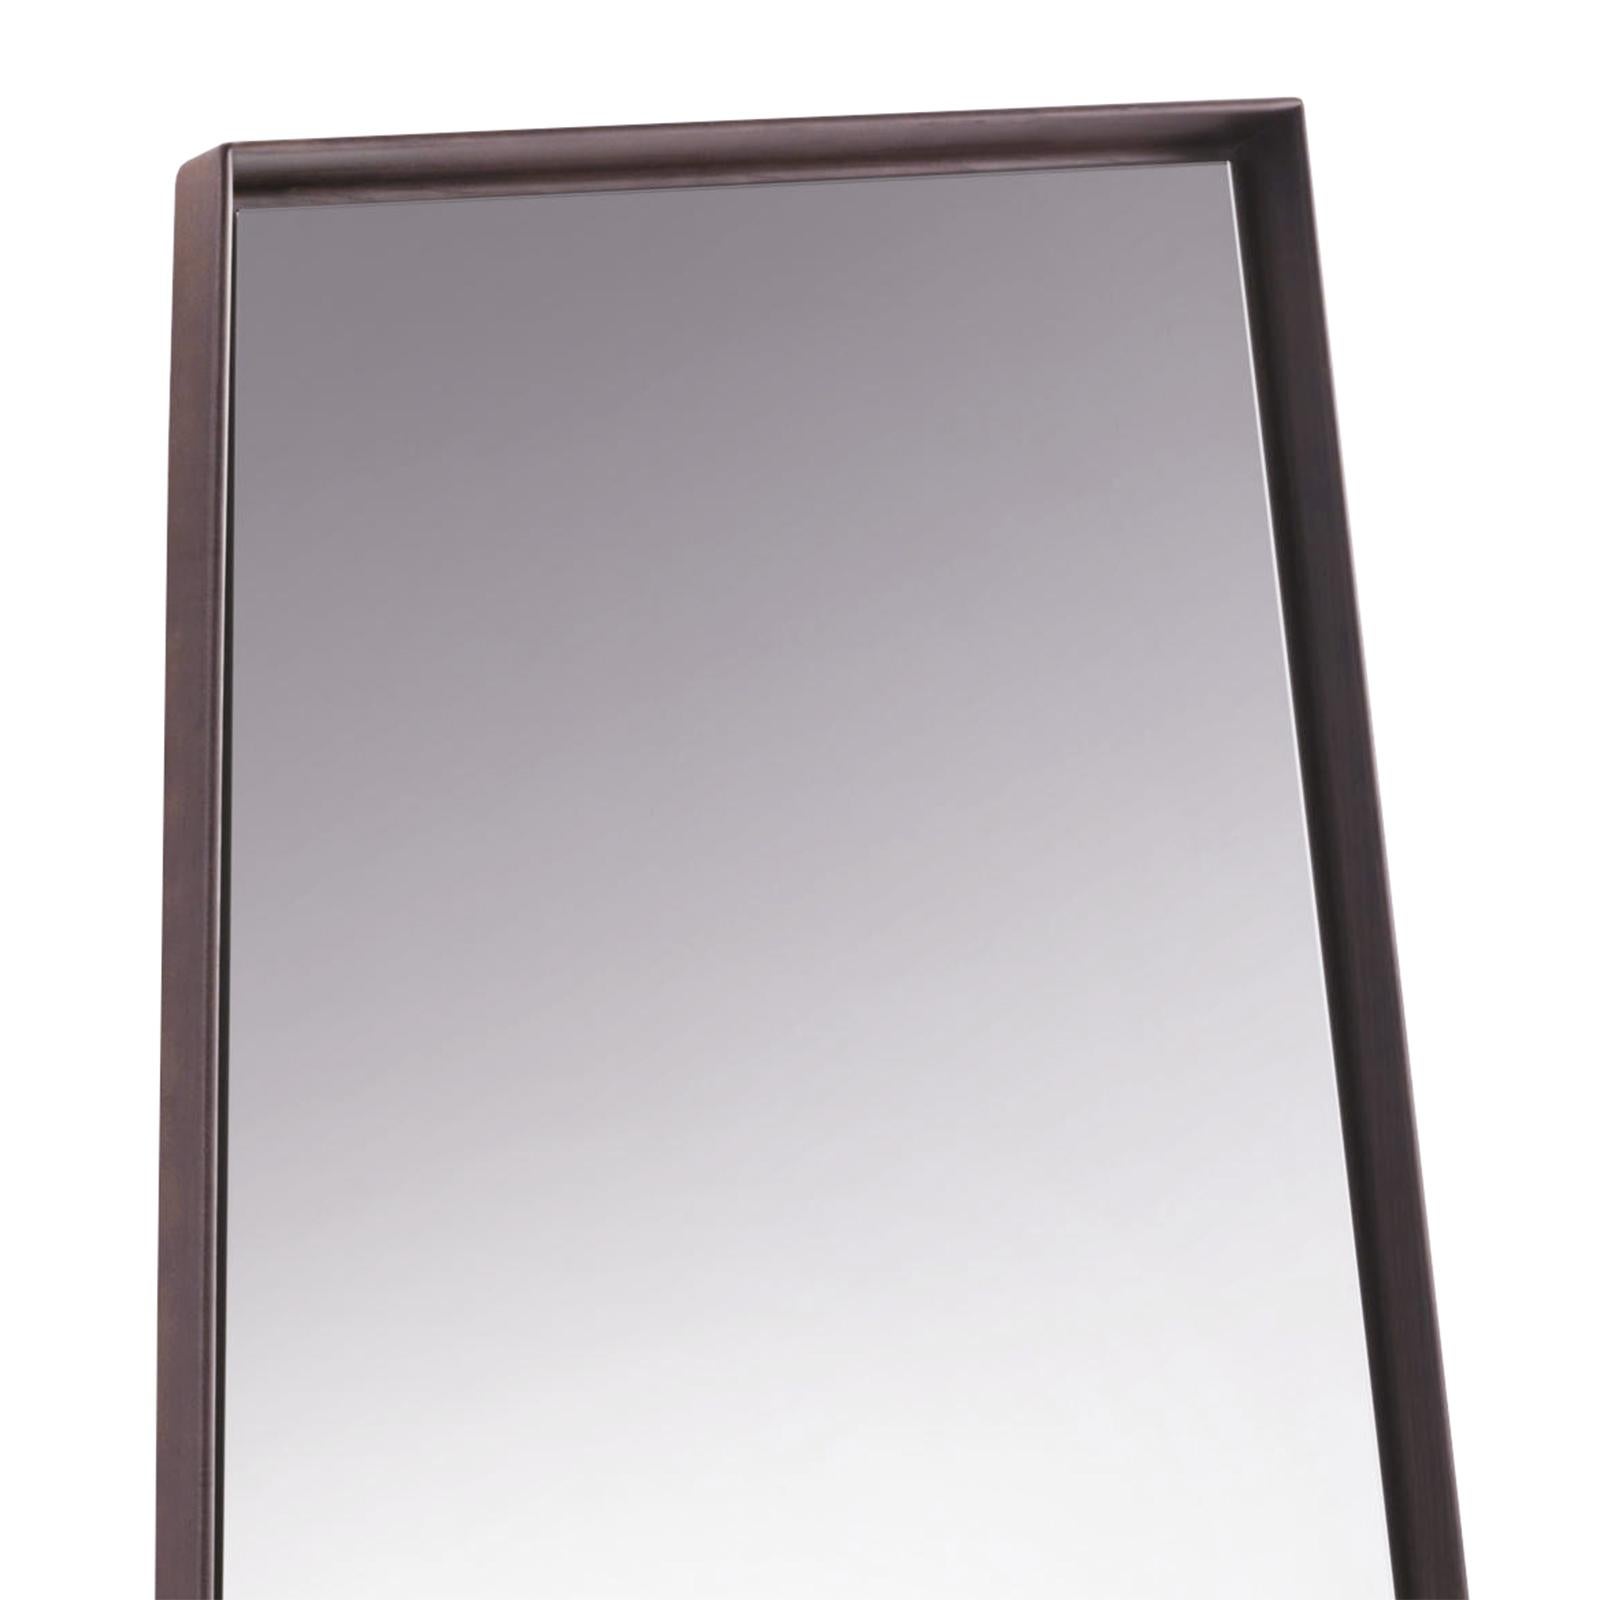 Mirror panel large ash with solid ash
wooden frame with mirror glass. Wall
mirror or floor mirror.
 